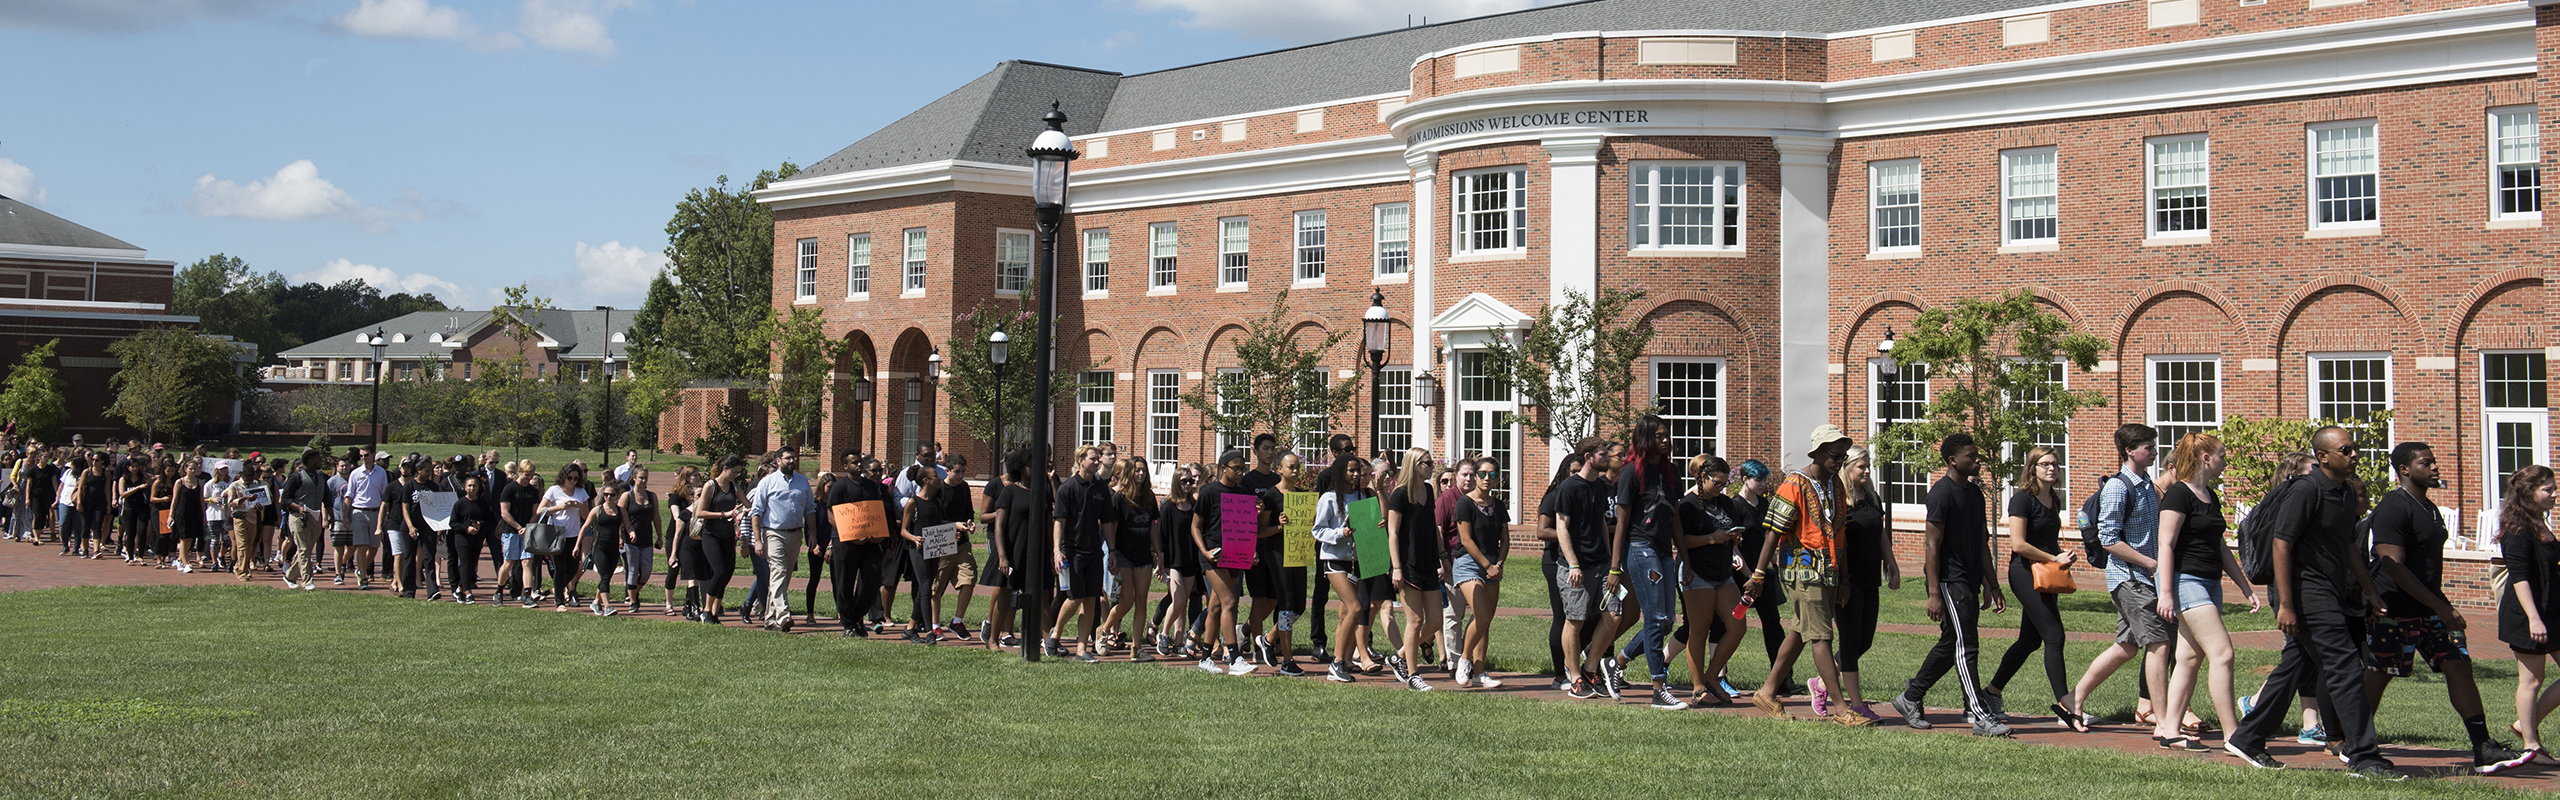 A gathering and march was organized by Elon's Black Student Union in response to the shooting deaths of two men in Tulsa and Charlotte. Hundreds of students, faculty and staff marched silently through the Elon University campus.